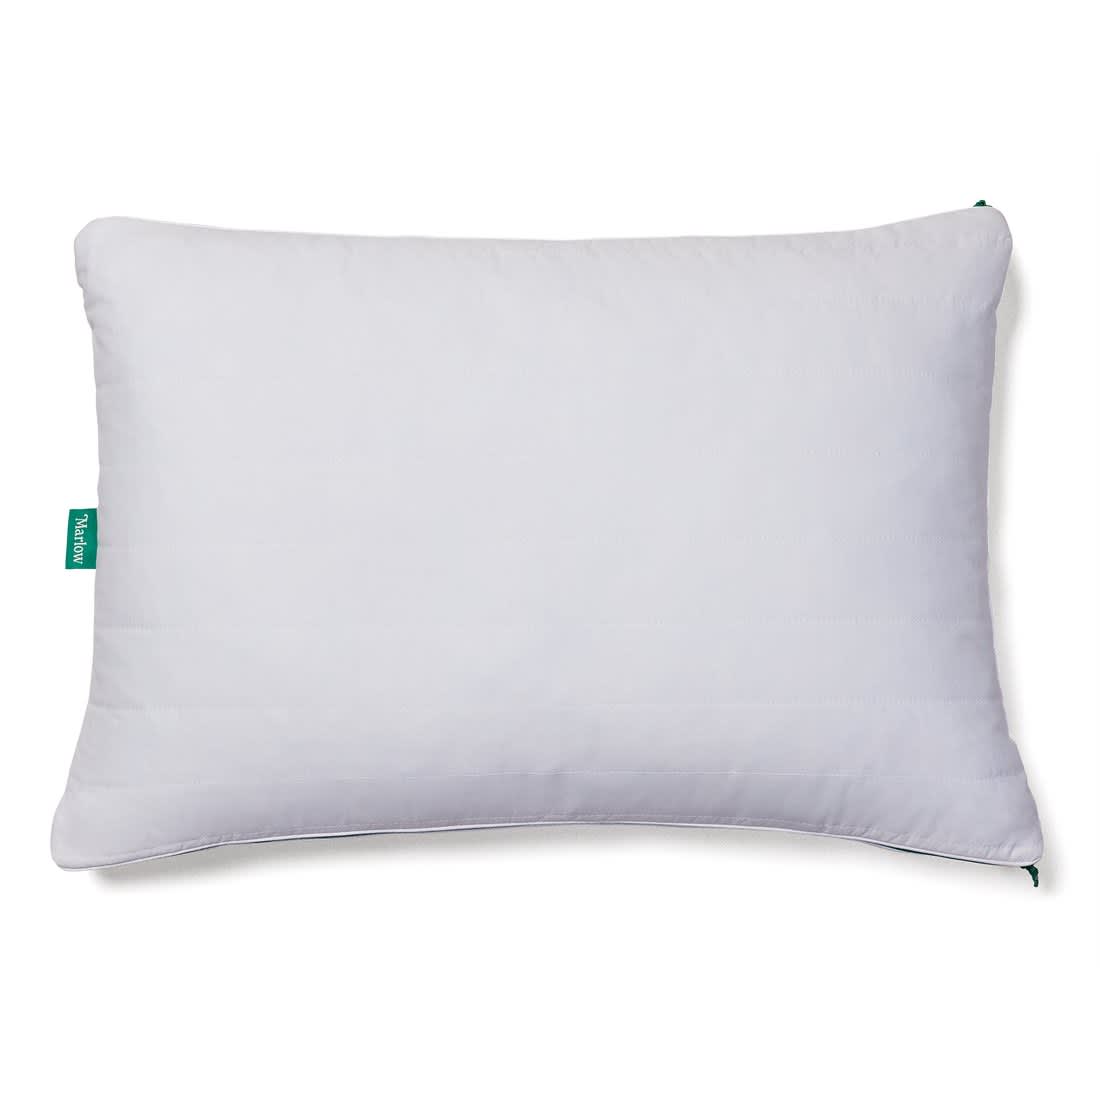 Marlow Cooling Pillow Review: 5 Writers Tried the Adjustable Pillow